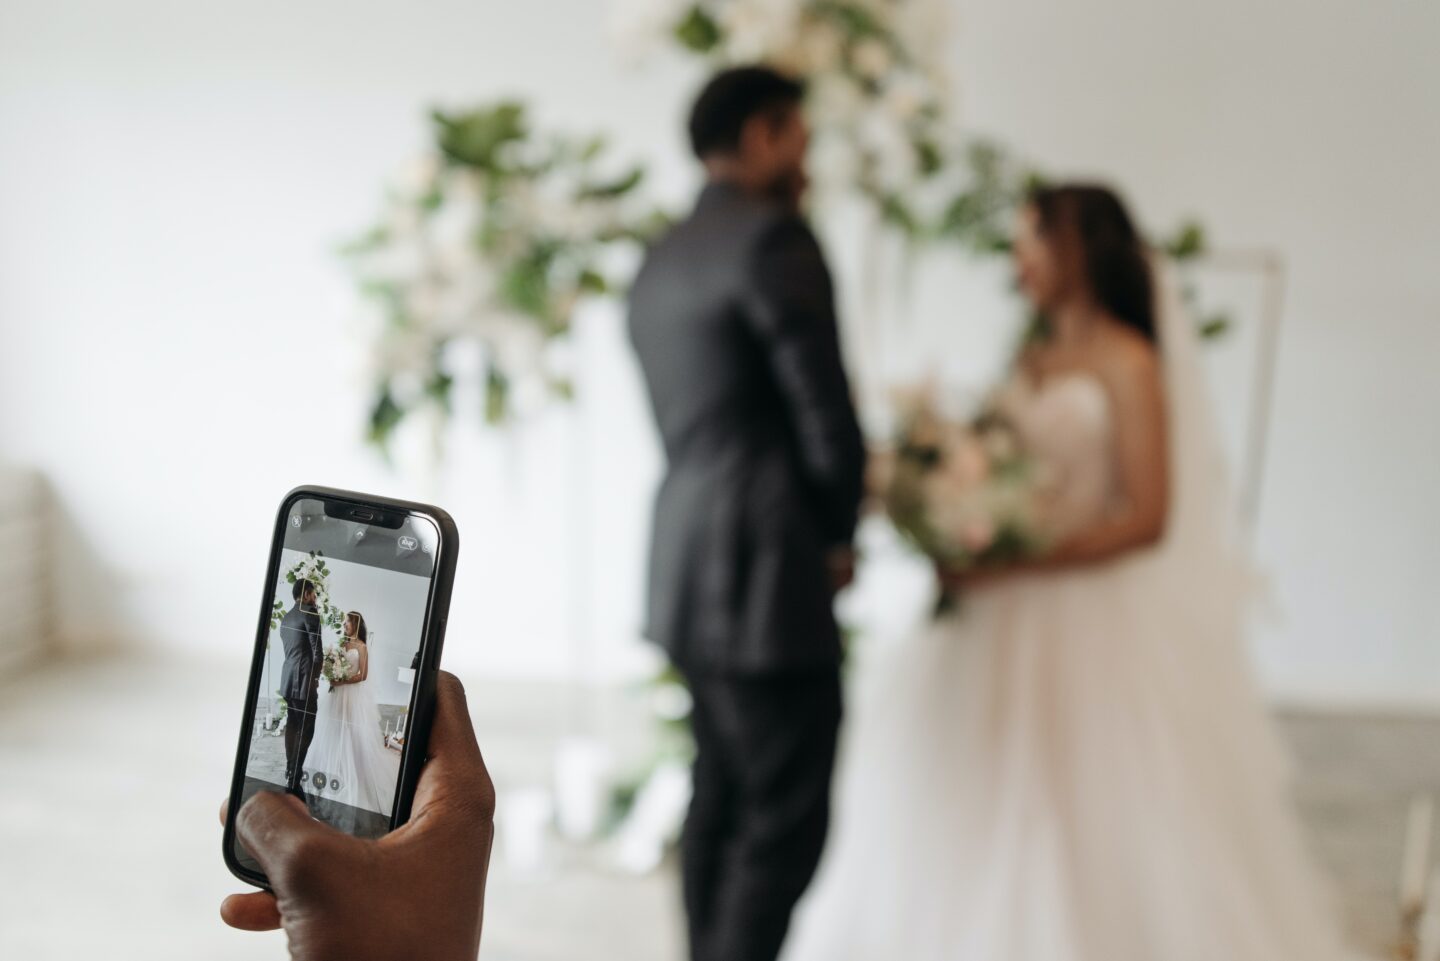 The Pros and Cons of Having An Unplugged Wedding